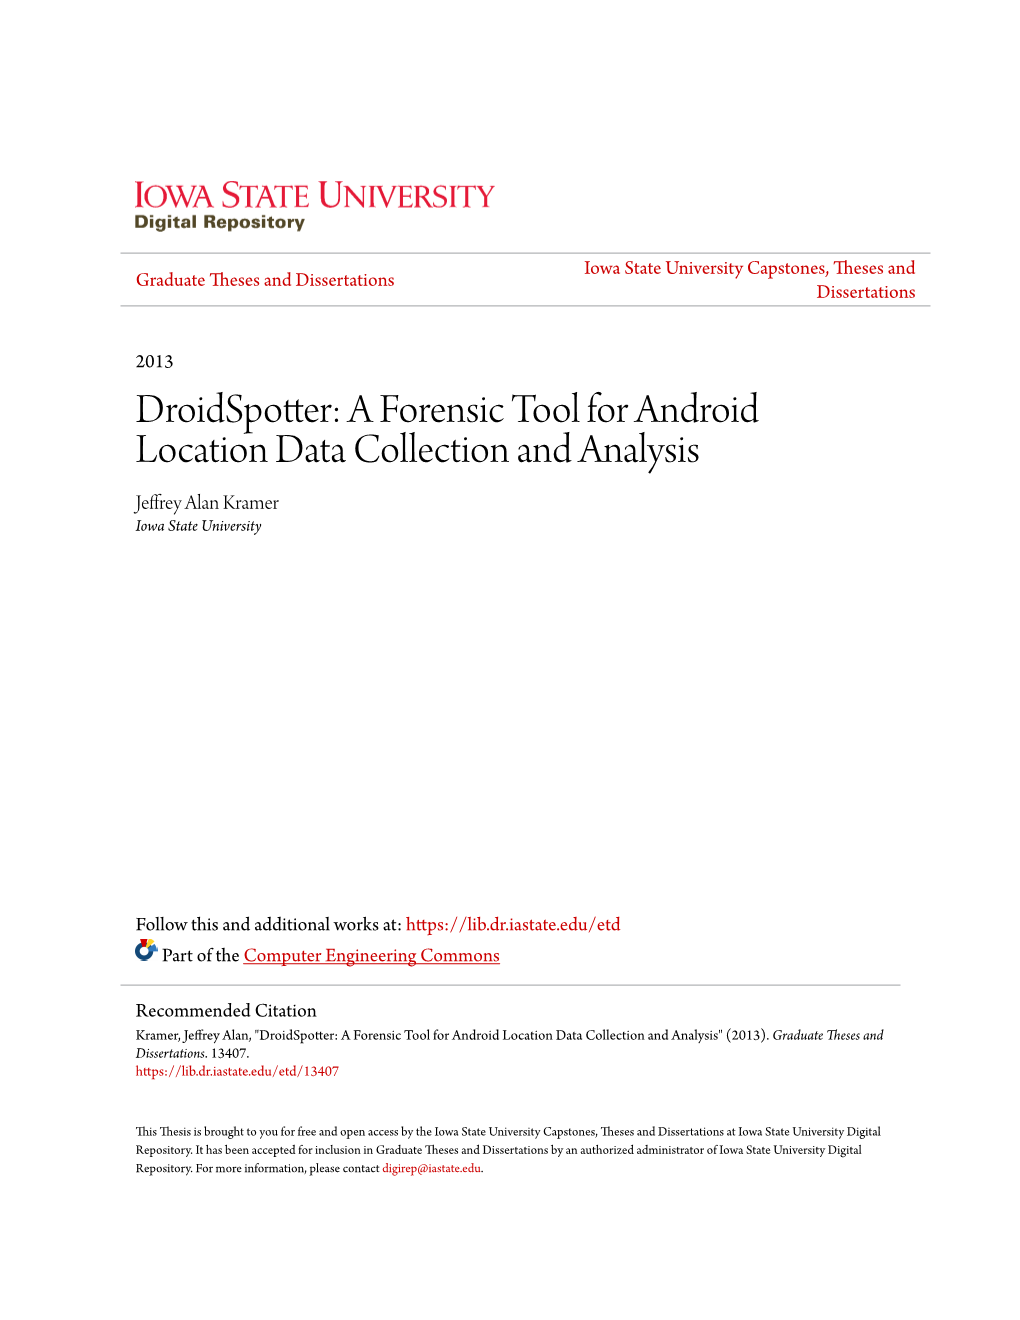 A Forensic Tool for Android Location Data Collection and Analysis Jeffrey Alan Kramer Iowa State University